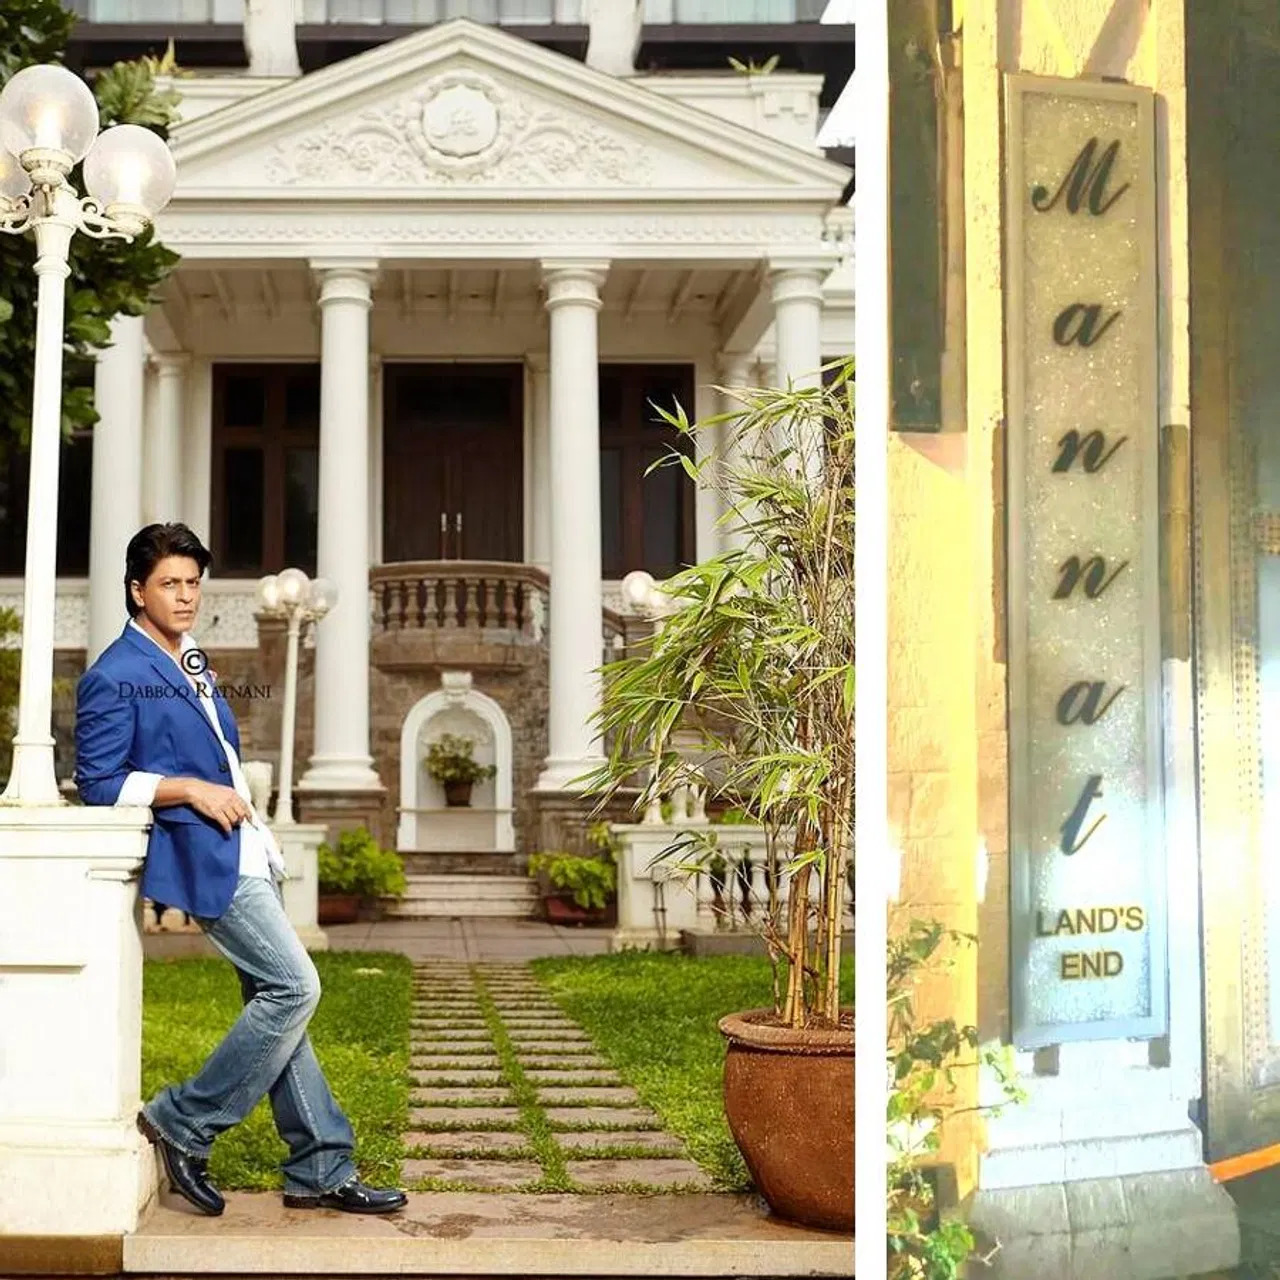 Shah-Rukh-Khan-Residence-Mannat-Name-Plate-Gets-Makeover-know-interesting-fact-about-mannat-2.